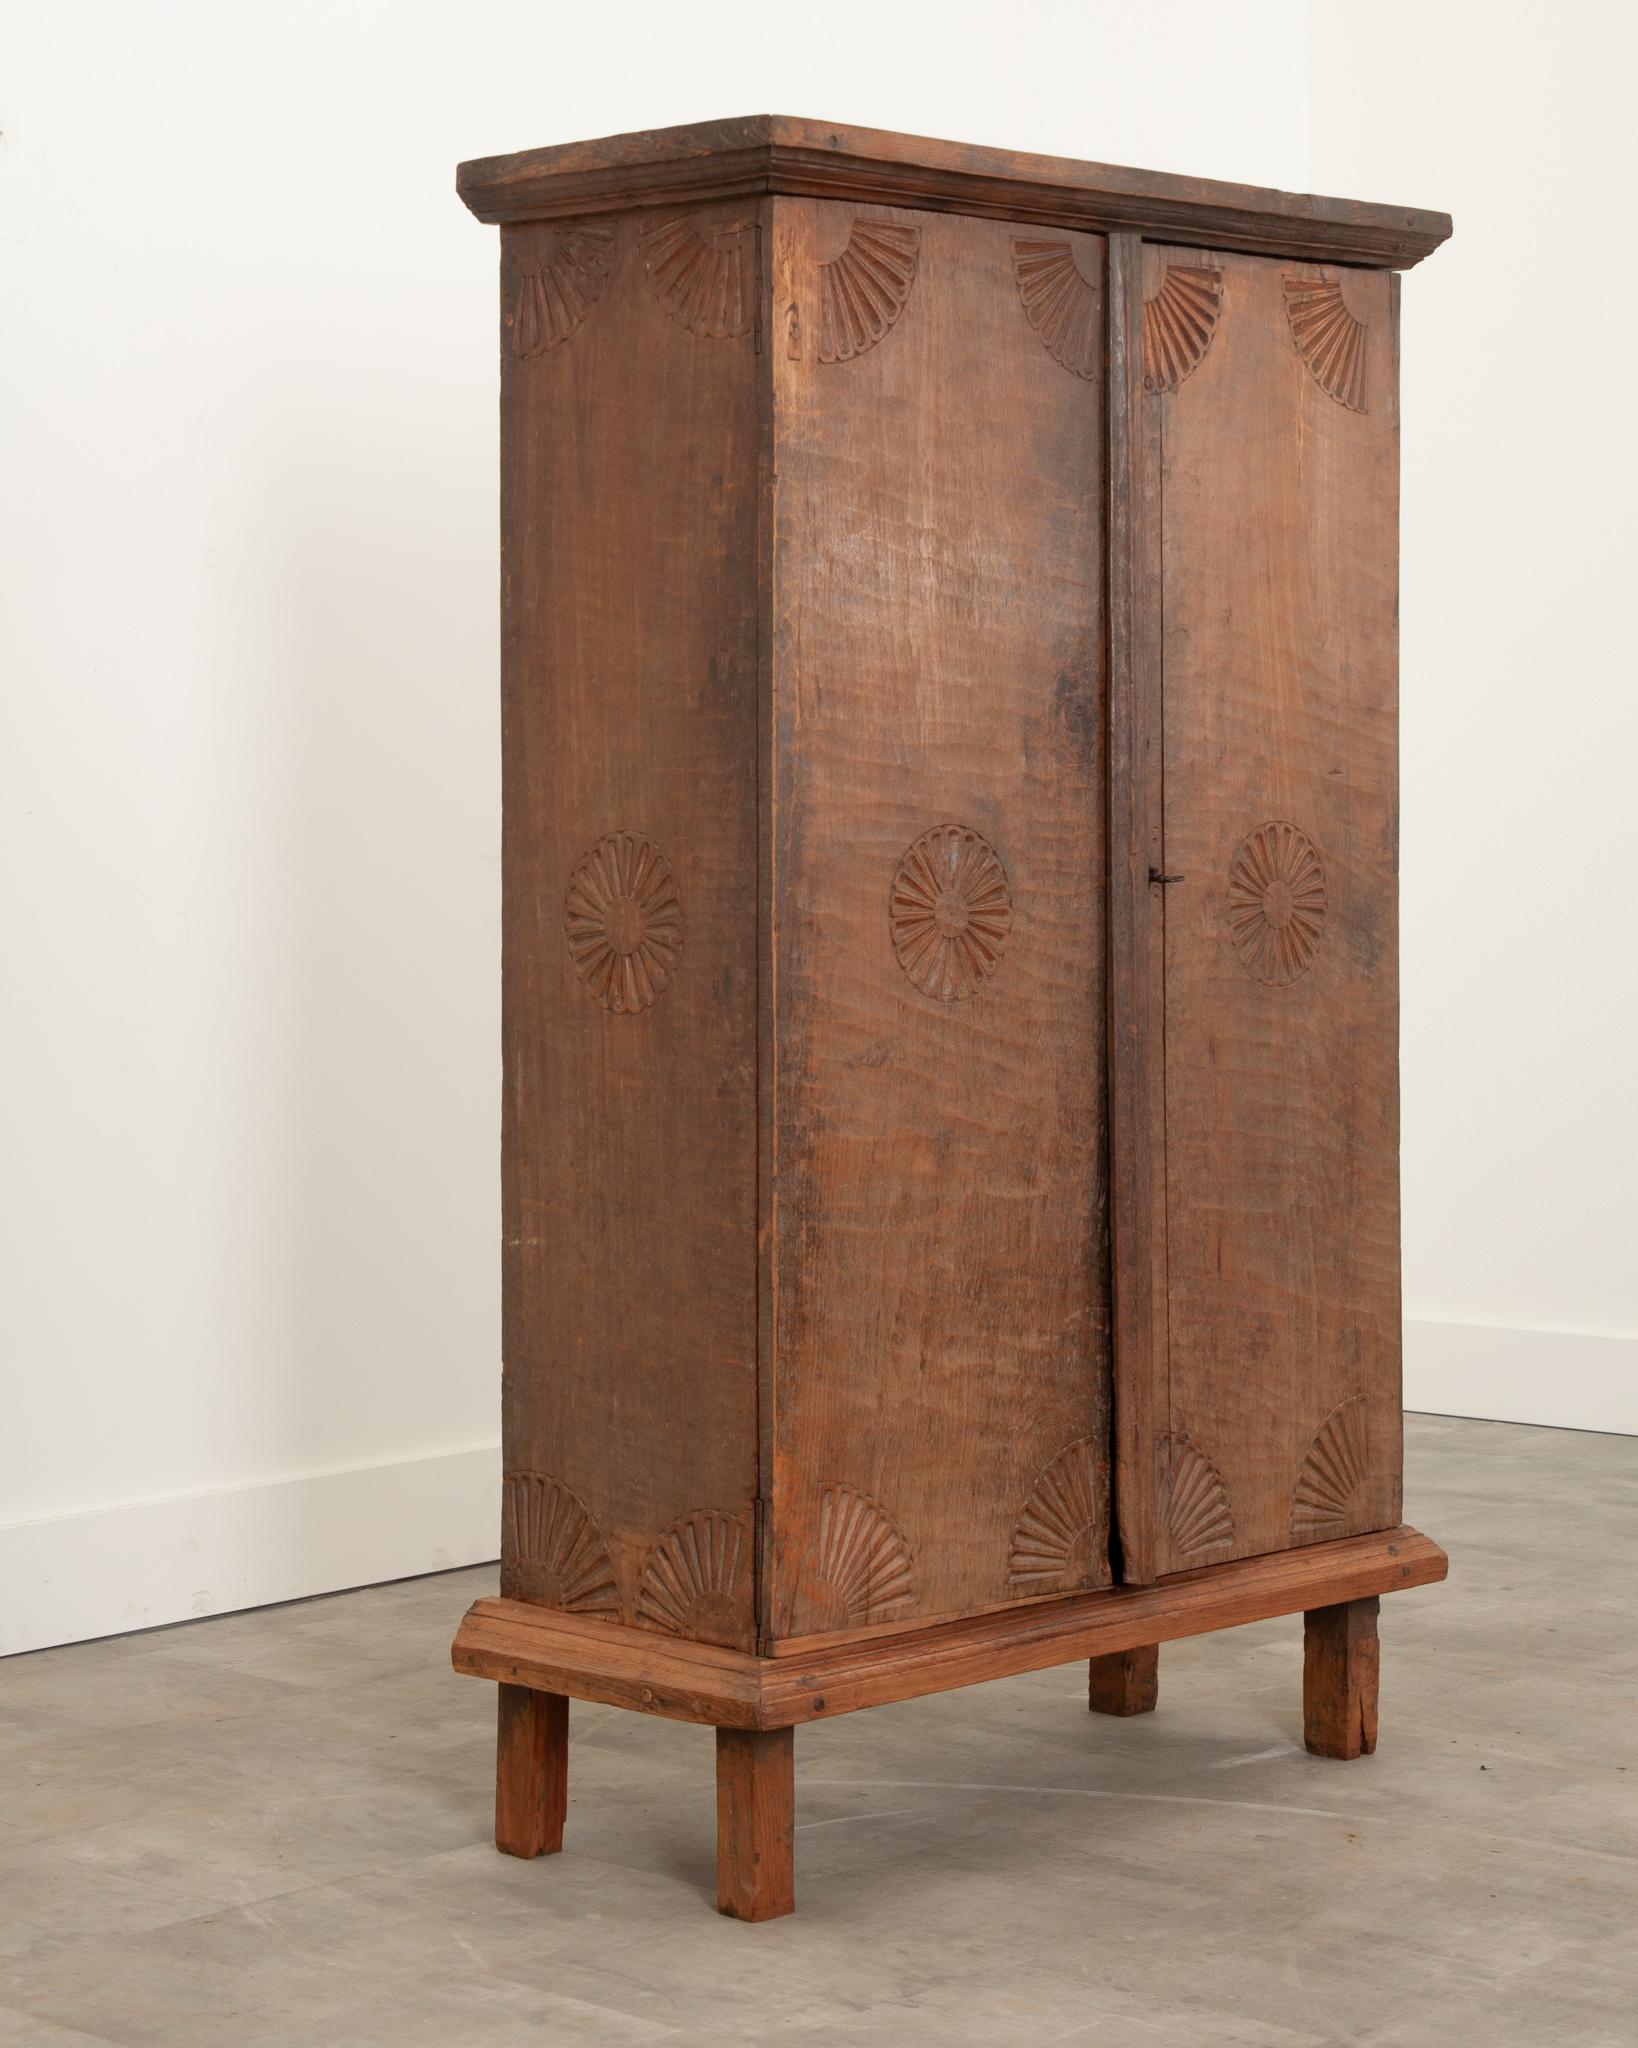 A primitive teak cabinet from British Colonial India. The cabinet has been totally carved and planed by hand. It features a repeated carved sunburst motif found on all panels. The interior has two fixed shelves and can be secured with the cabinet’s